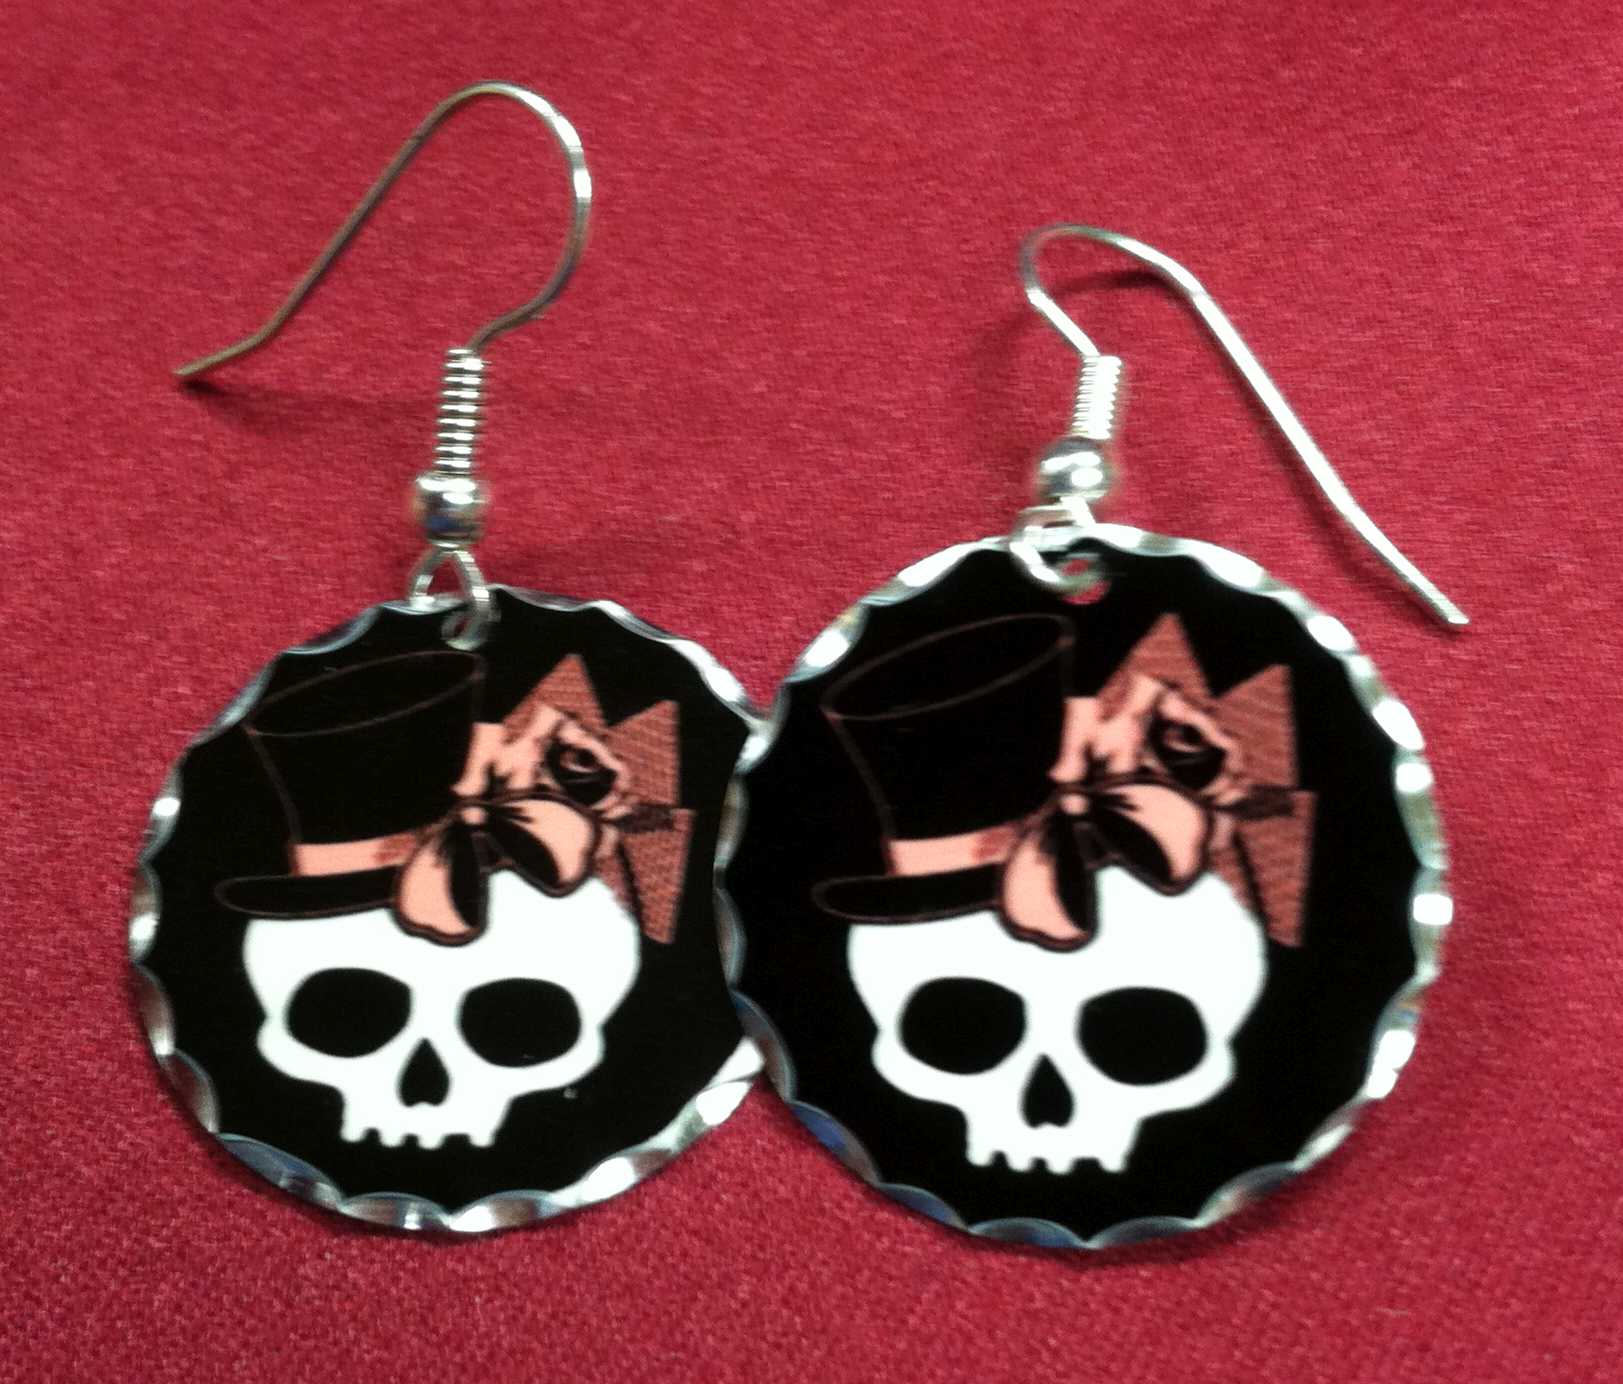 Cutie Skull Earrings made with sublimation printing